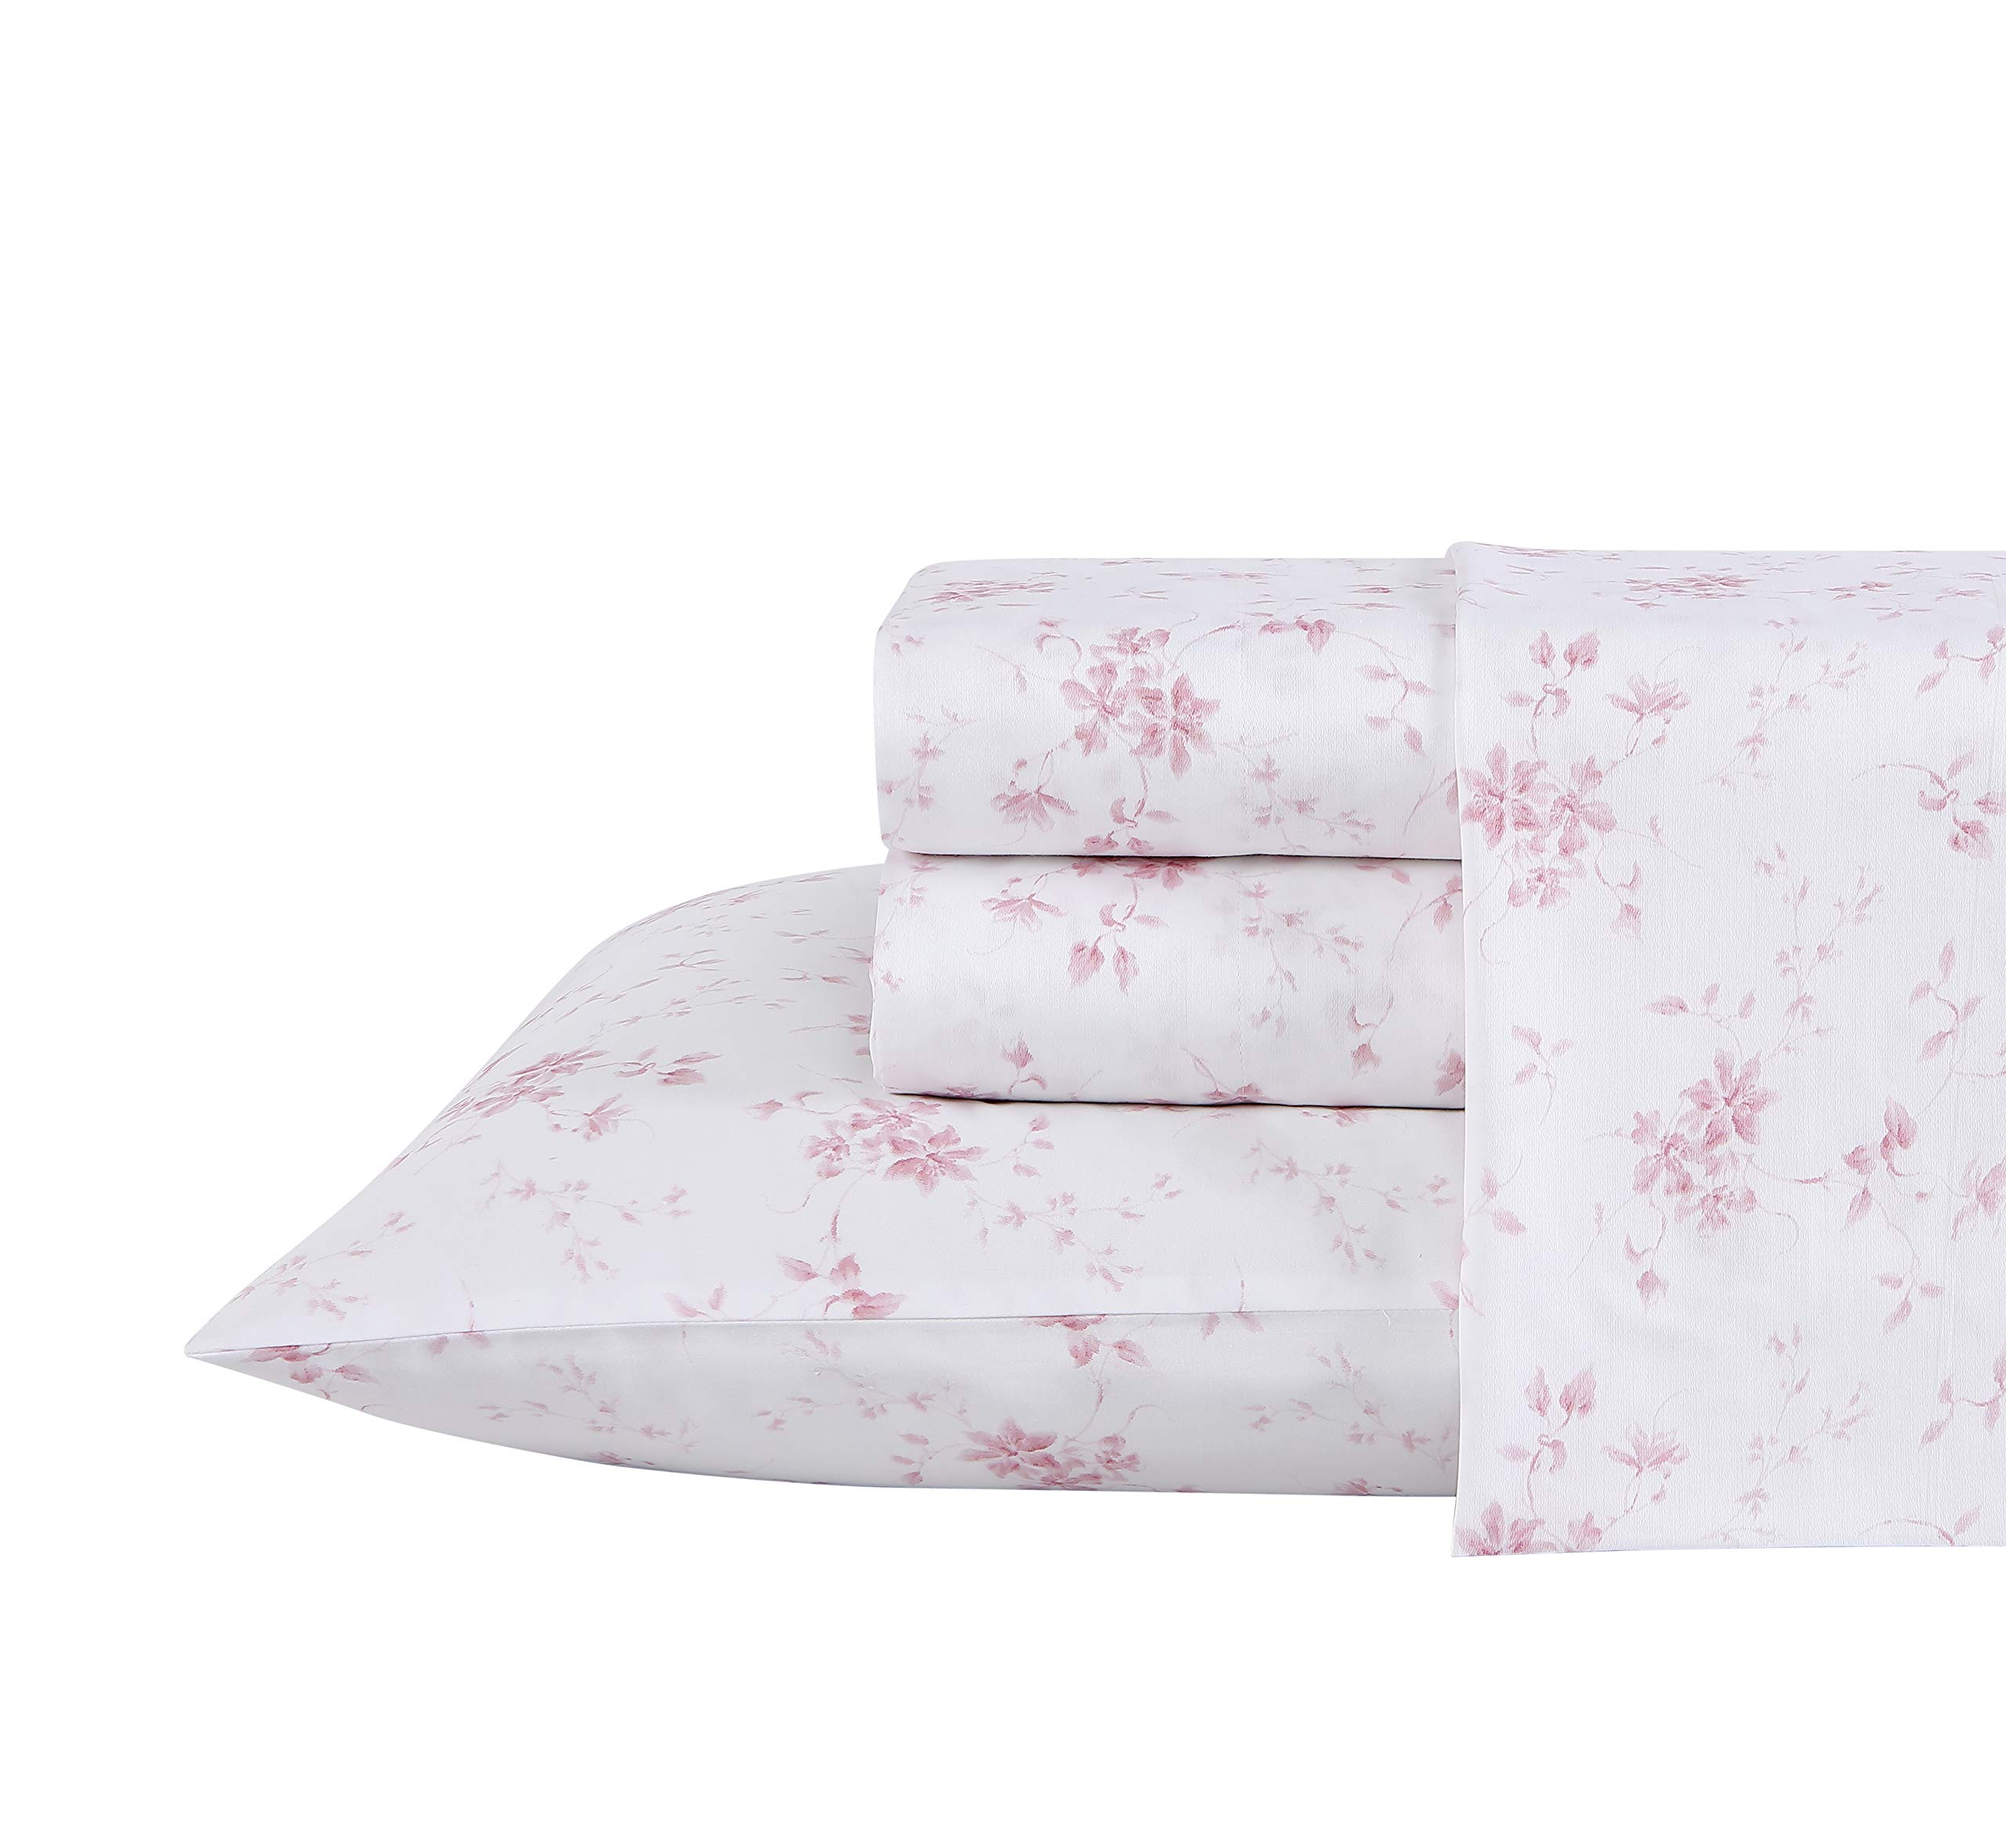 Laura Ashley Home - King Sheets, Soft Sateen Cotton Bed...